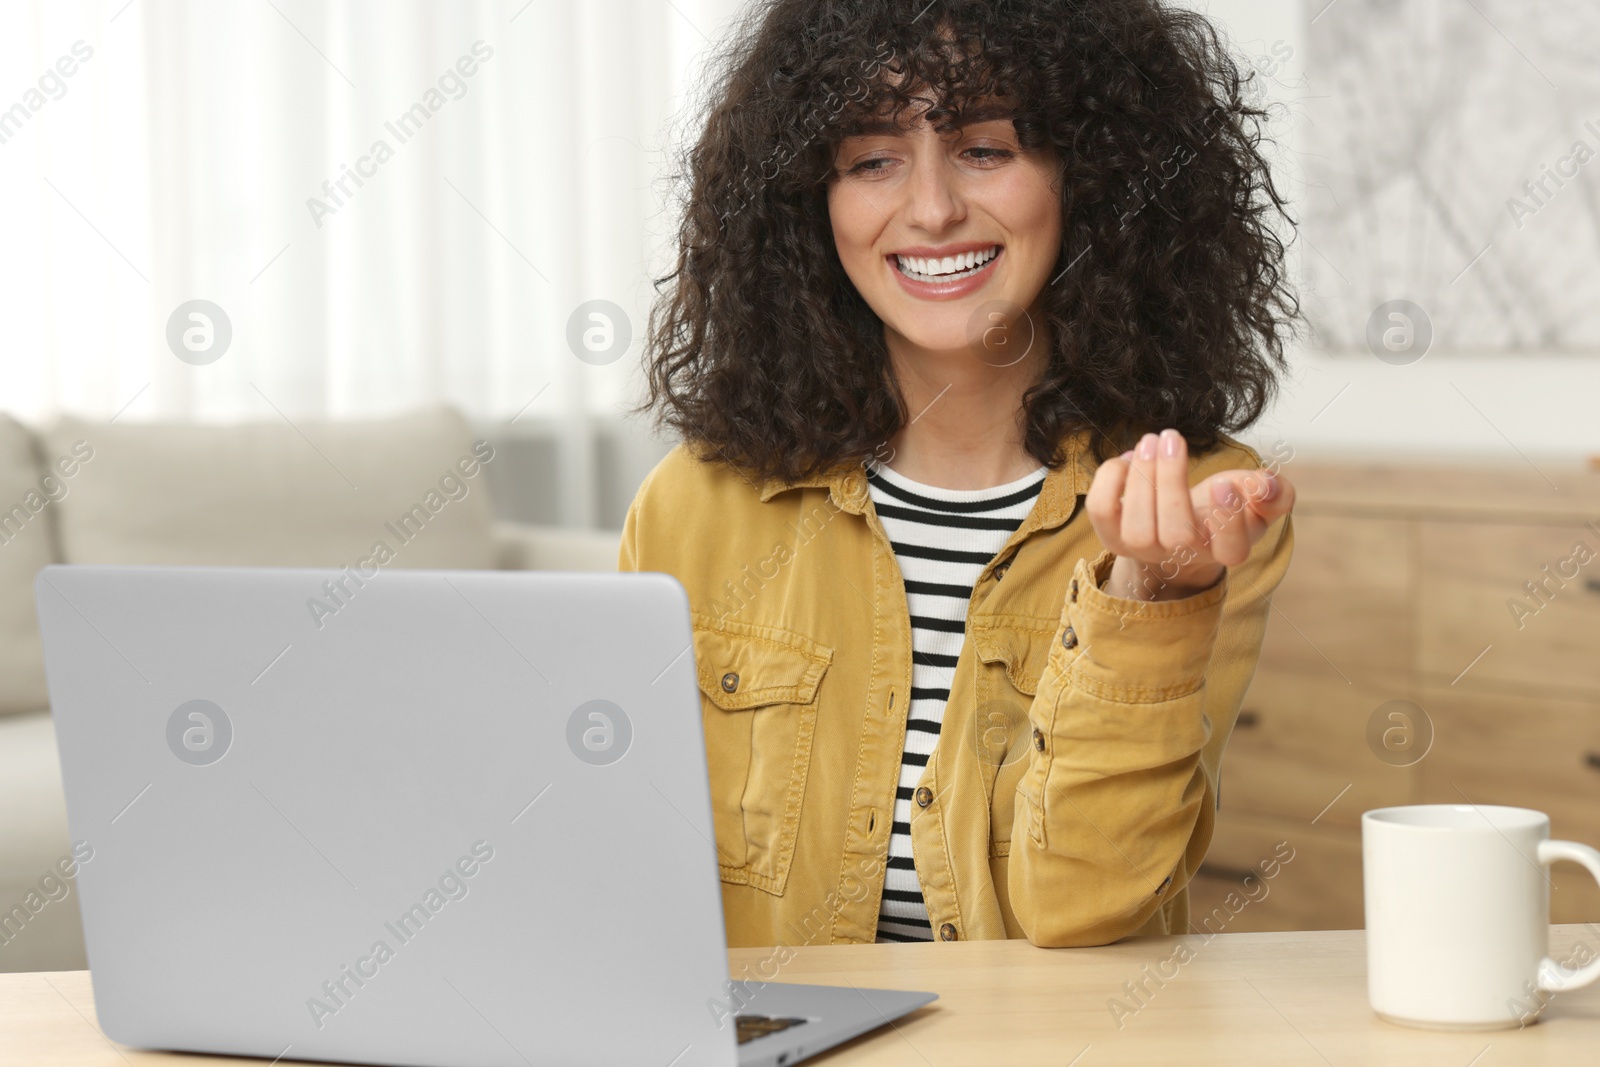 Photo of Happy woman having video chat via laptop at table in room